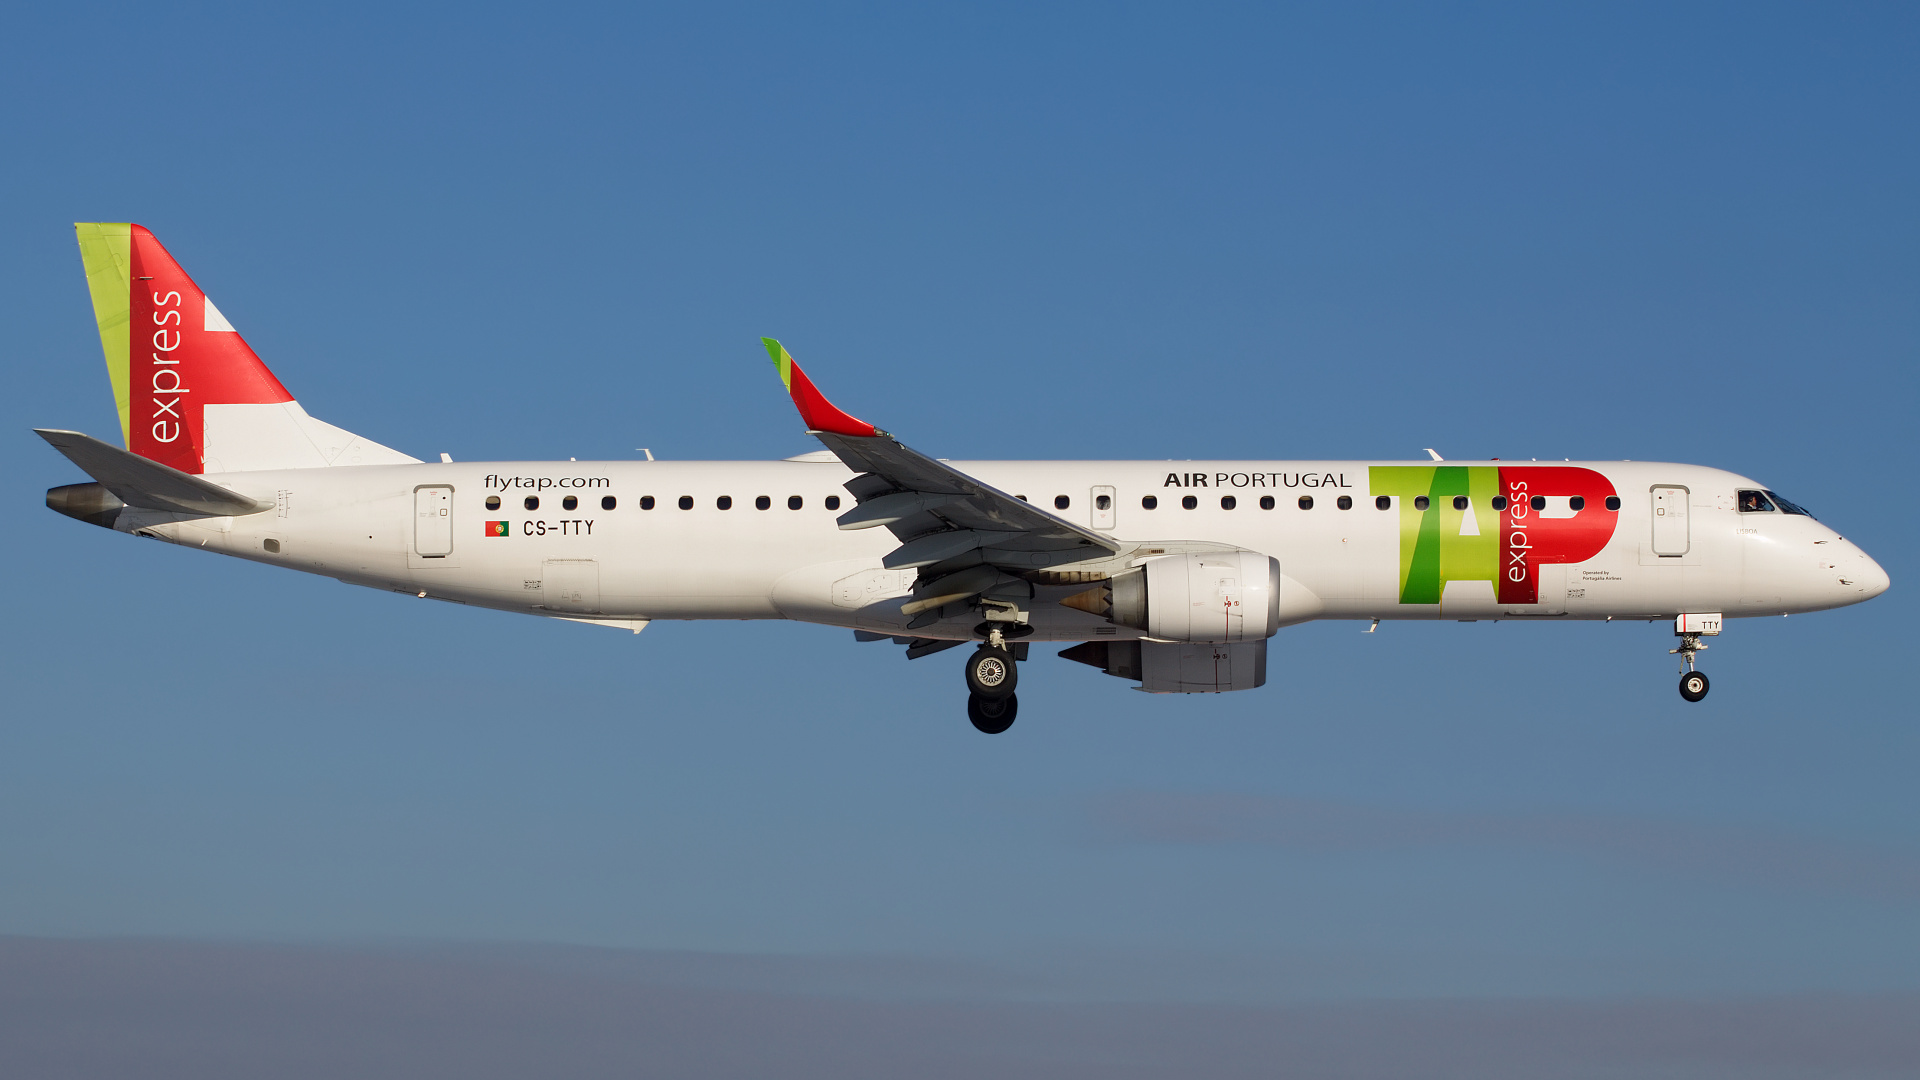 CS-TTY, TAP Express (TAP Air Portugal) (Aircraft » EPWA Spotting » Embraer E195)